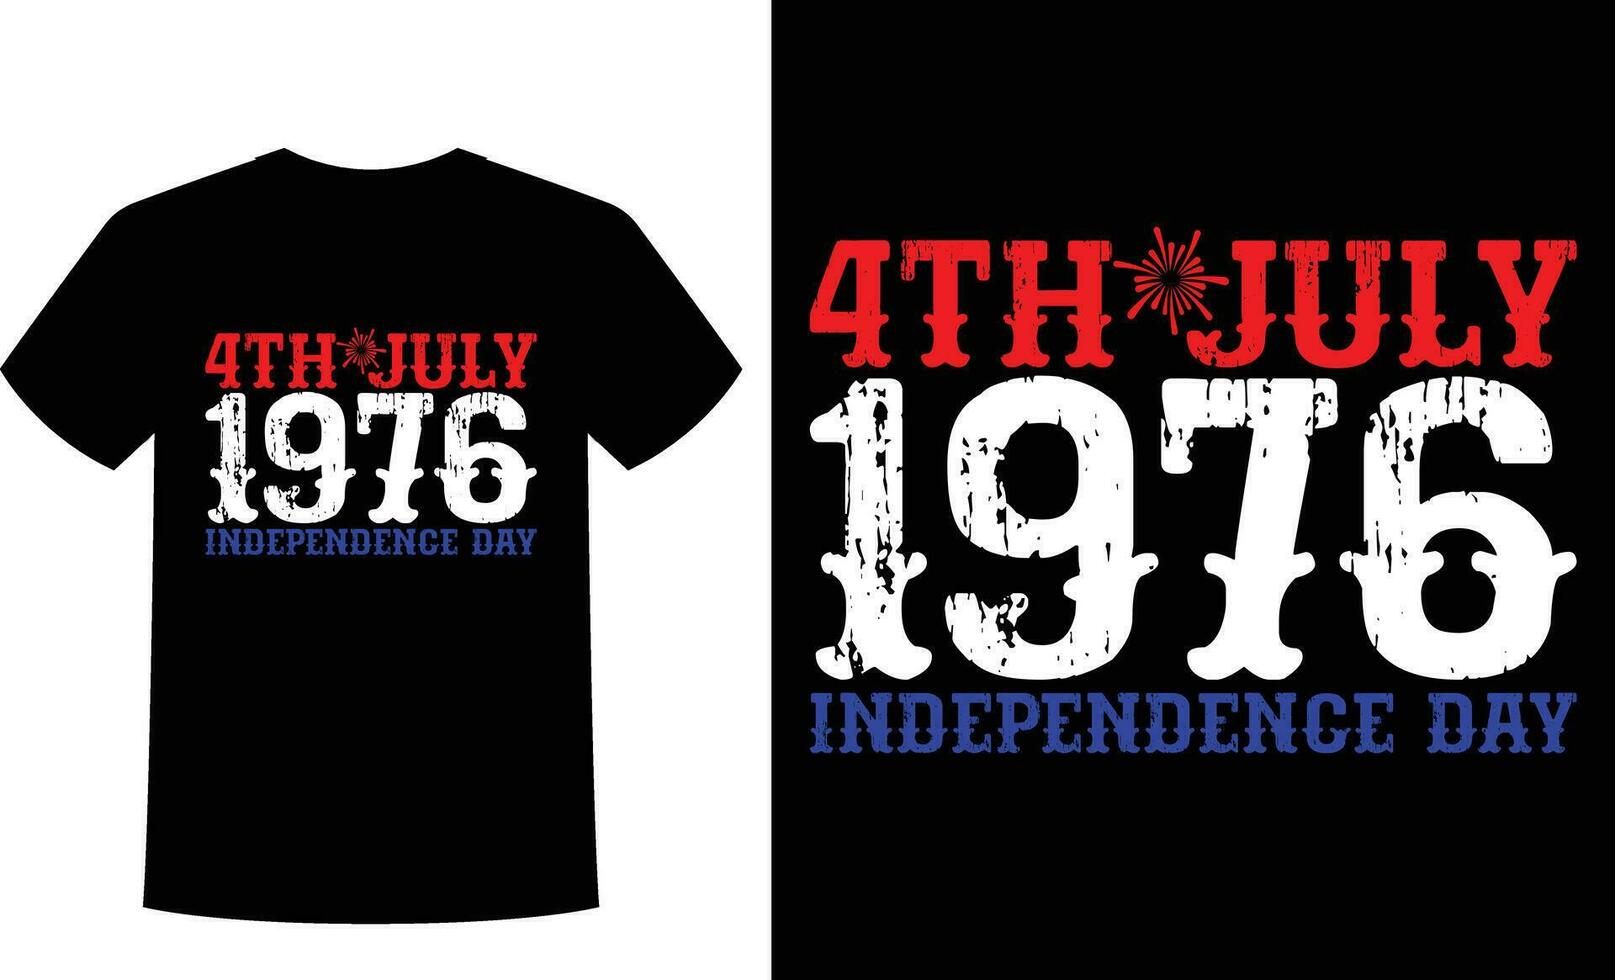 4th july 1976 independence day t-shirt vector